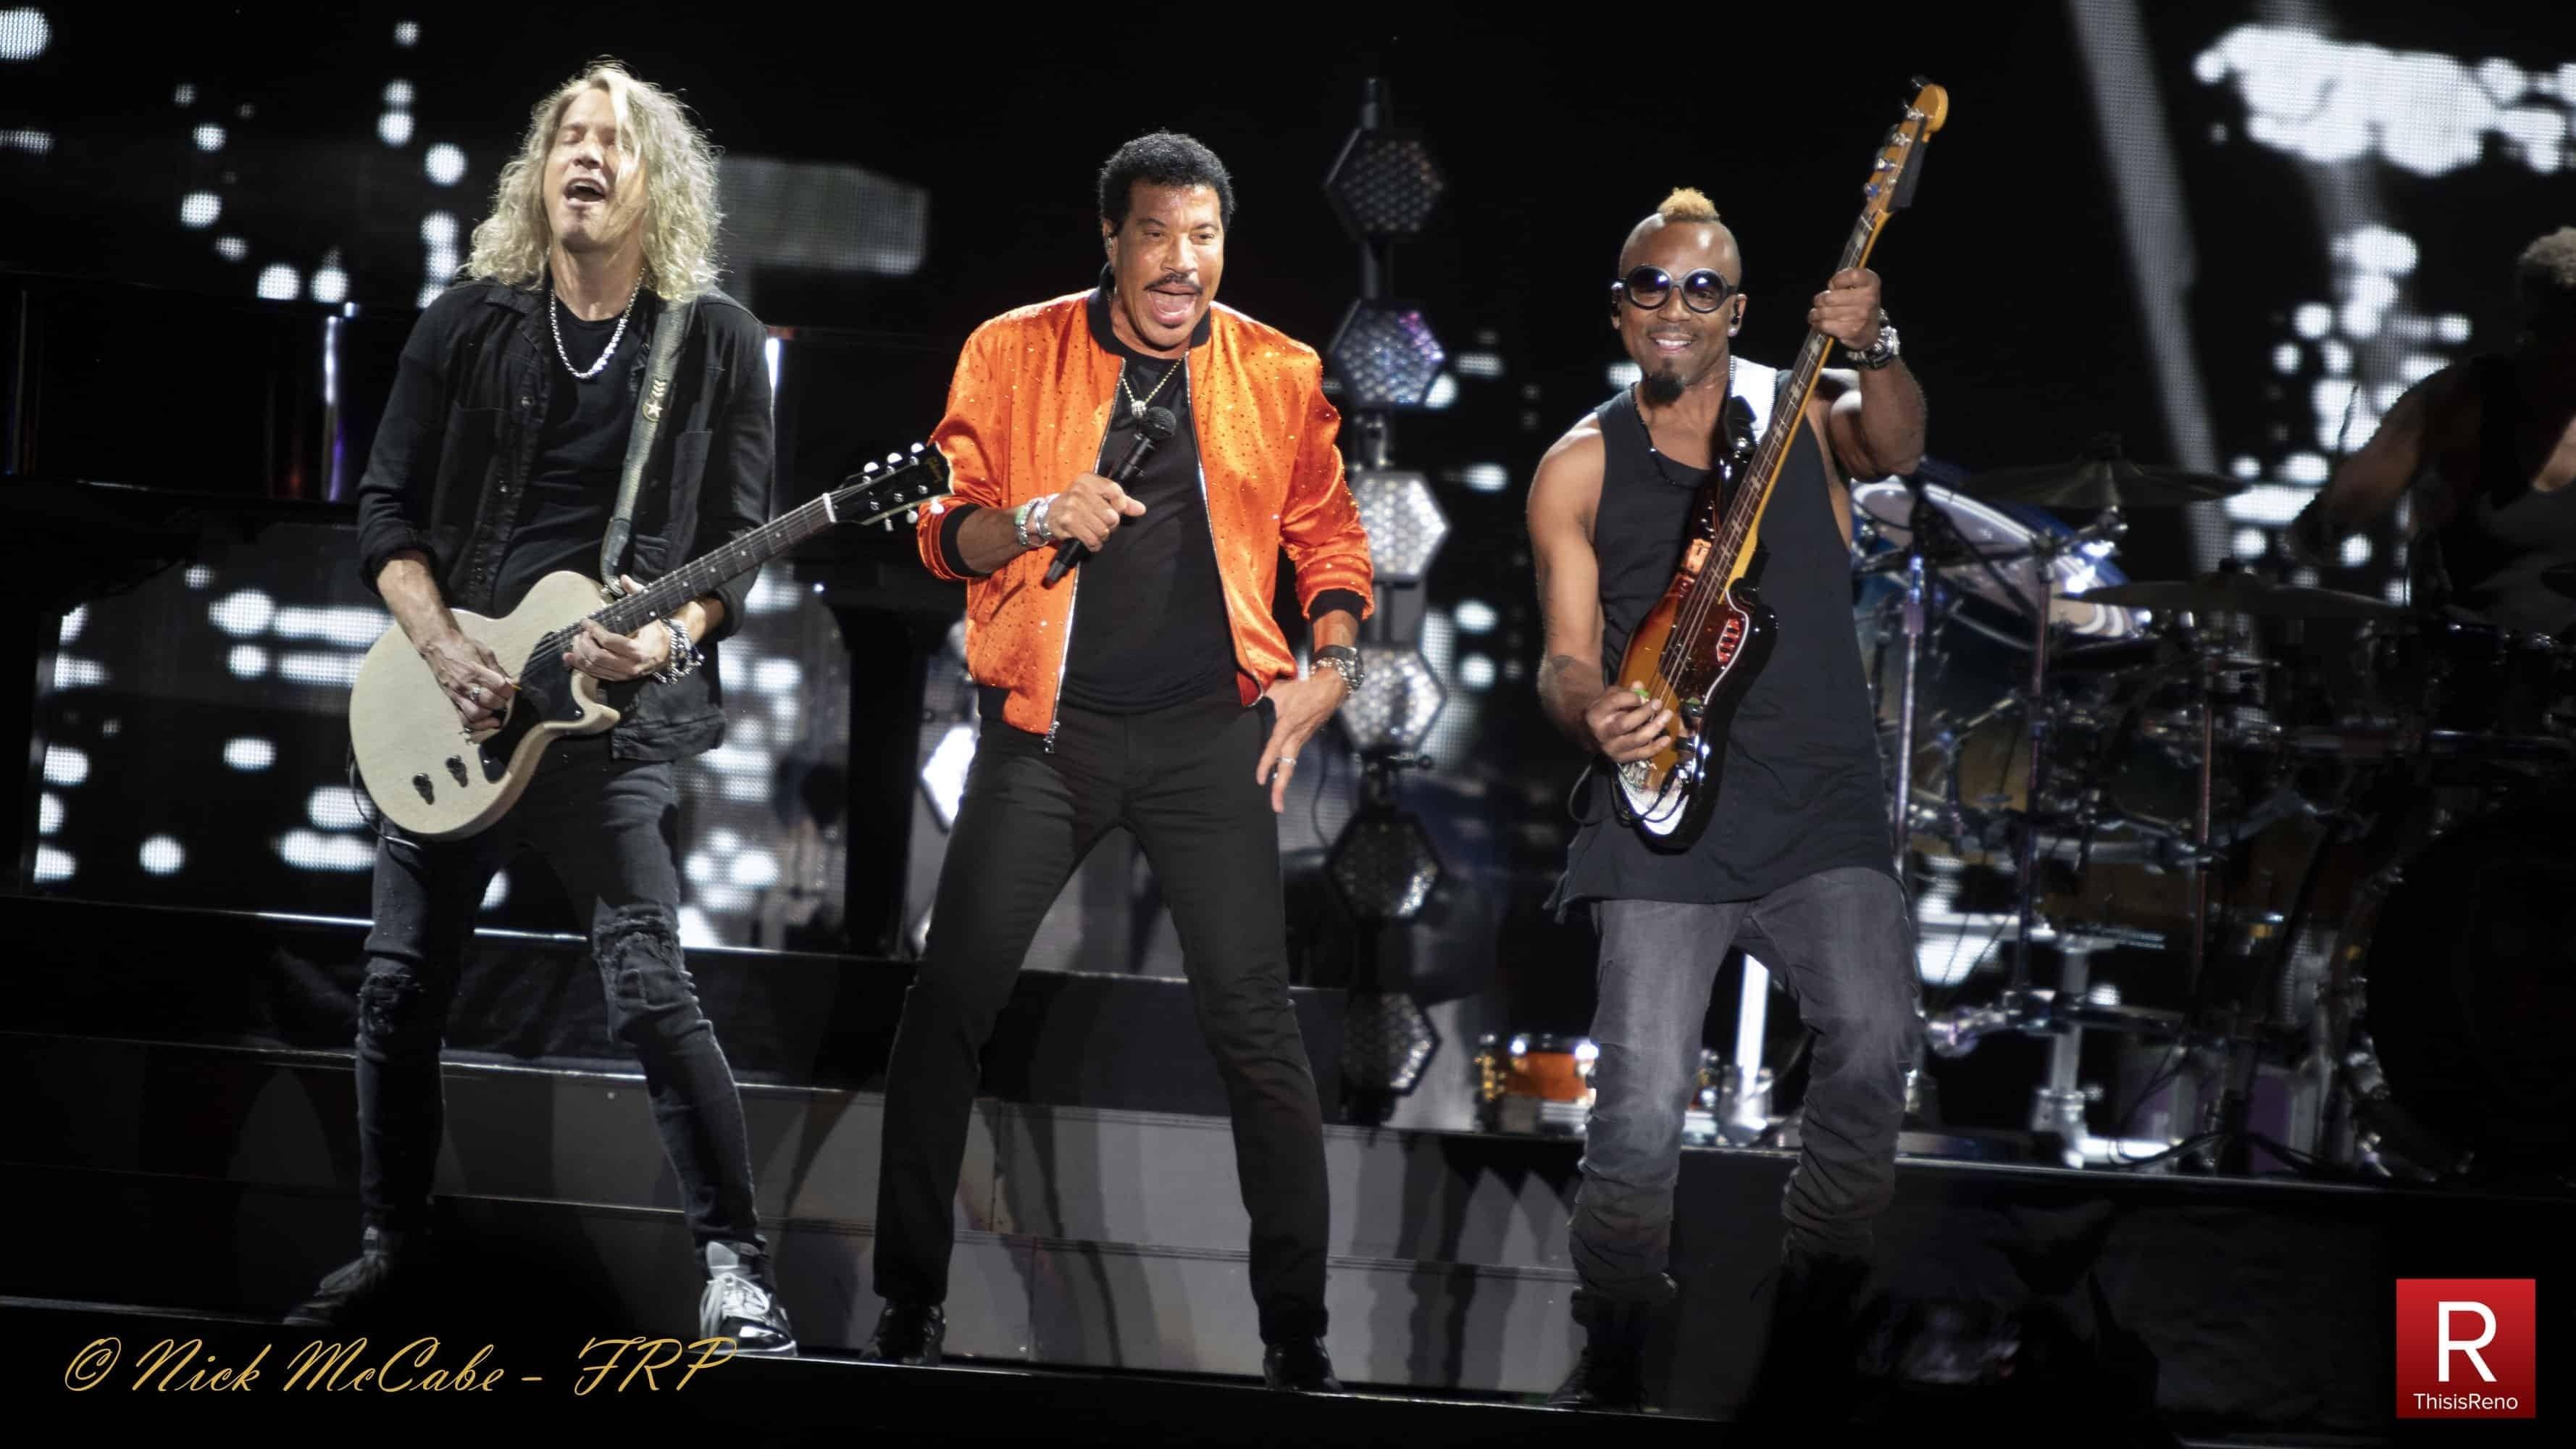 ACM Presents Lionel Richie and Friends in Concert backdrop